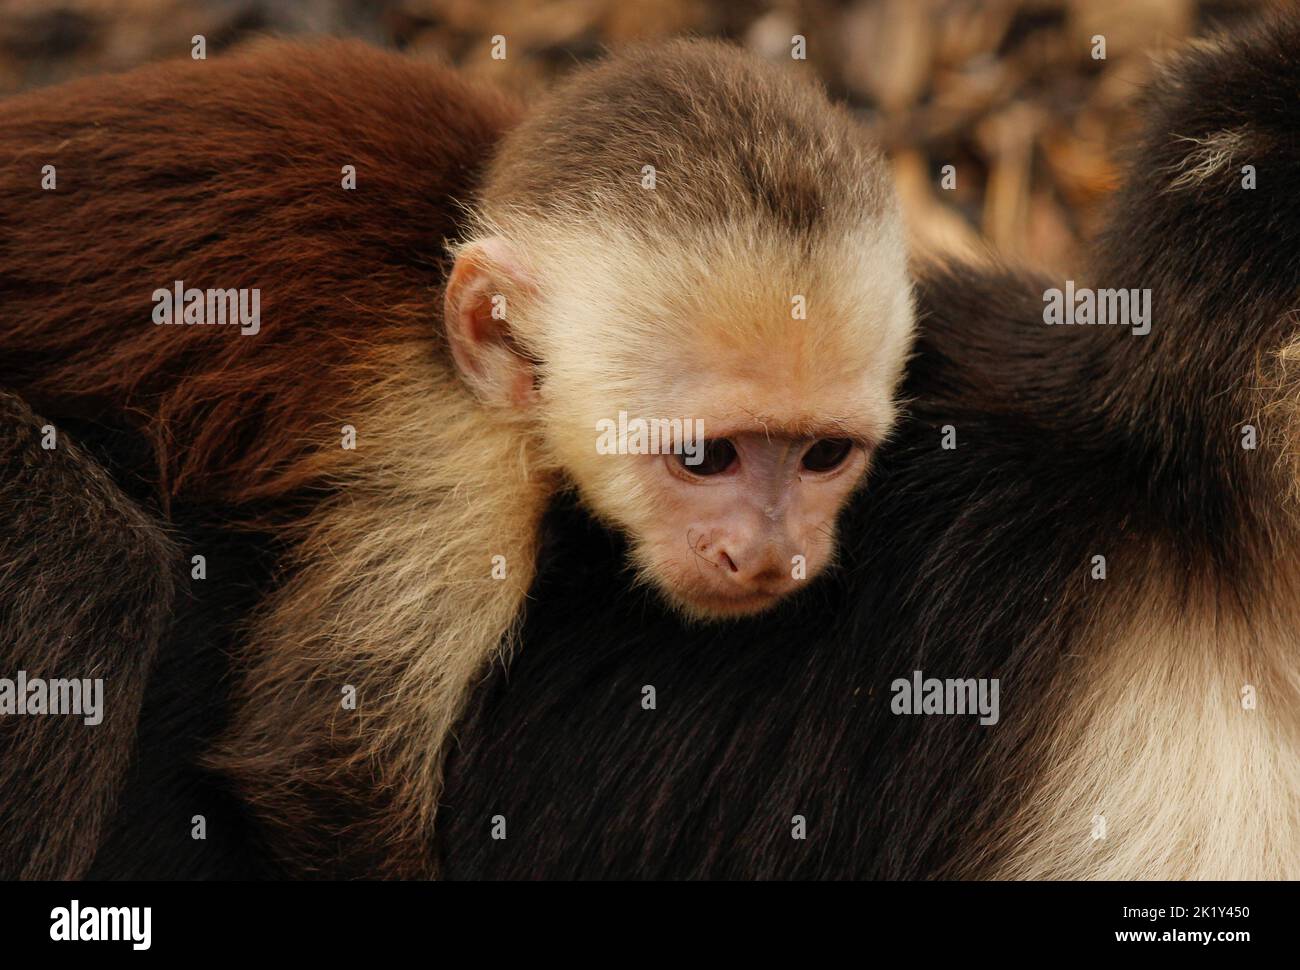 A capuchin baby clings to its mother's back along the Costa Rican coast. A baby monkey portrait of unusual intimacy Stock Photo